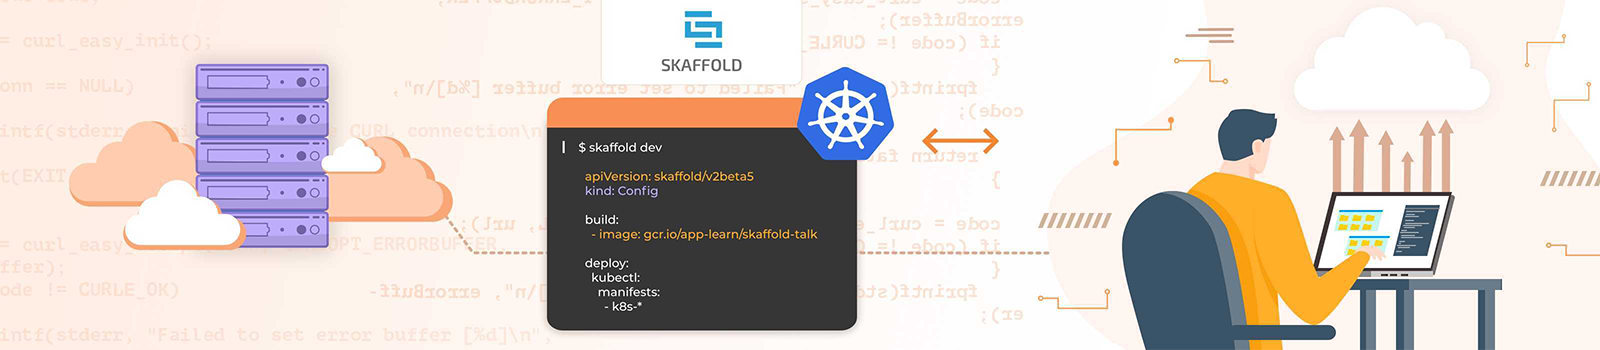 Skaffold - Building and Deploying Kubernetes Apps Simplified!